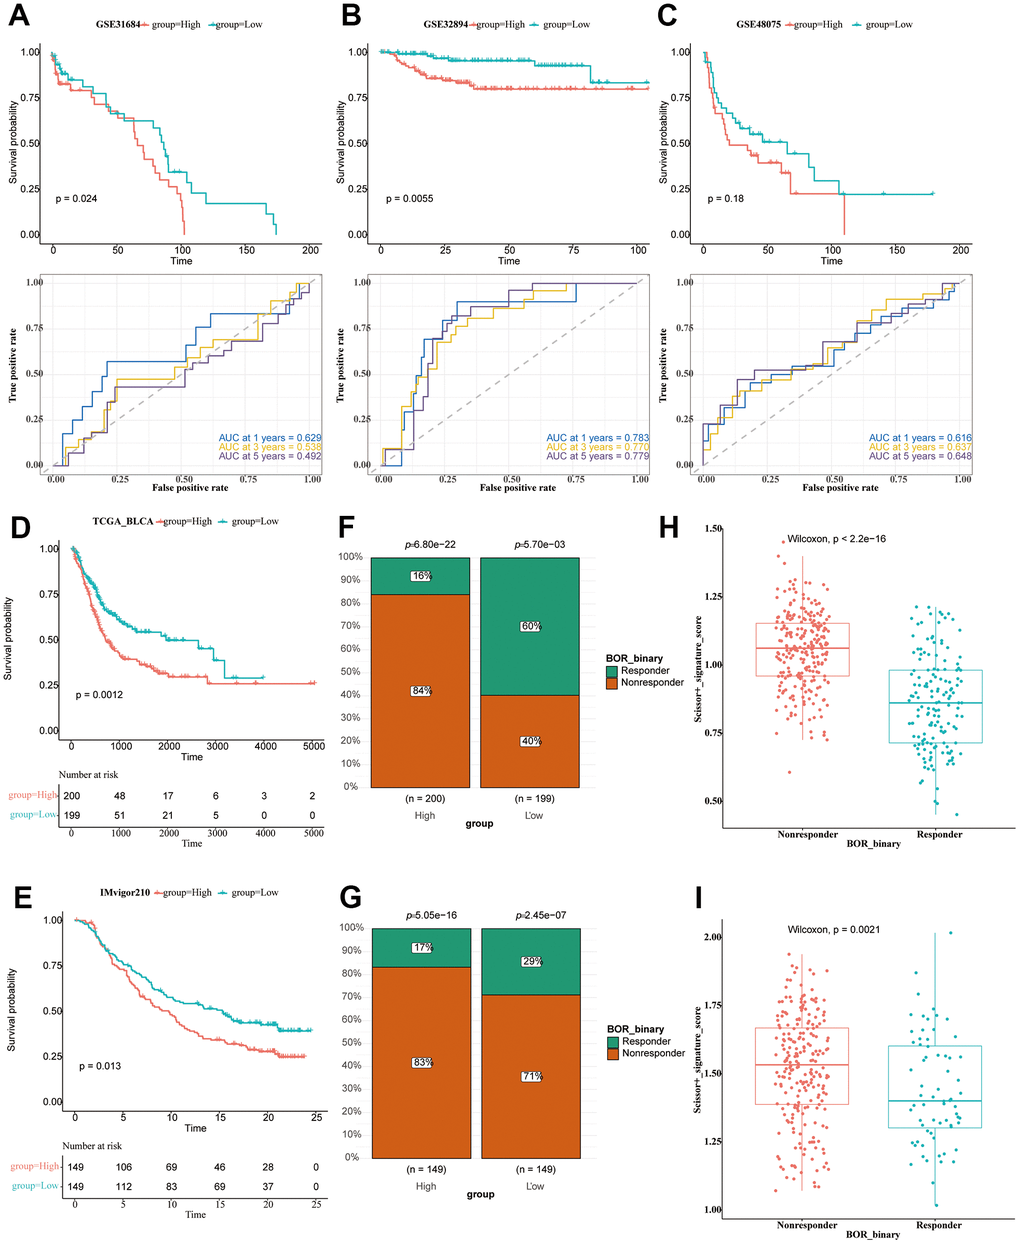 Immunotherapy analysis of BLCA patients. (A–C) The survival analysis and ROC curve analysis in all seven utilized datasets. GSE31684 (A); GSE32894 (B); GSE48074 (C). (D) The survival analysis of the TCGA-BLCA patients of high and low riskscore value, shown in the form of KM curve. (E) The survival analysis of the IMvigor210 cohort of BLCA patients of high and low riskscore value, shown in the form of KM curve. (F) The proportion of responsive and non-responsive patients in different risk groups in TCGA-BLCA patients using the chi-square test. (G) The proportion of responsive and non-responsive patients in different risk groups in IMvigor210 cohort using the chi-square test. (H) The box plot showing risk value of non-responsive and responsive patients in TCGA-BLCA cohort. (I) The box plot showing risk value of non-responsive and responsive patients in IMvigor210 cohort.